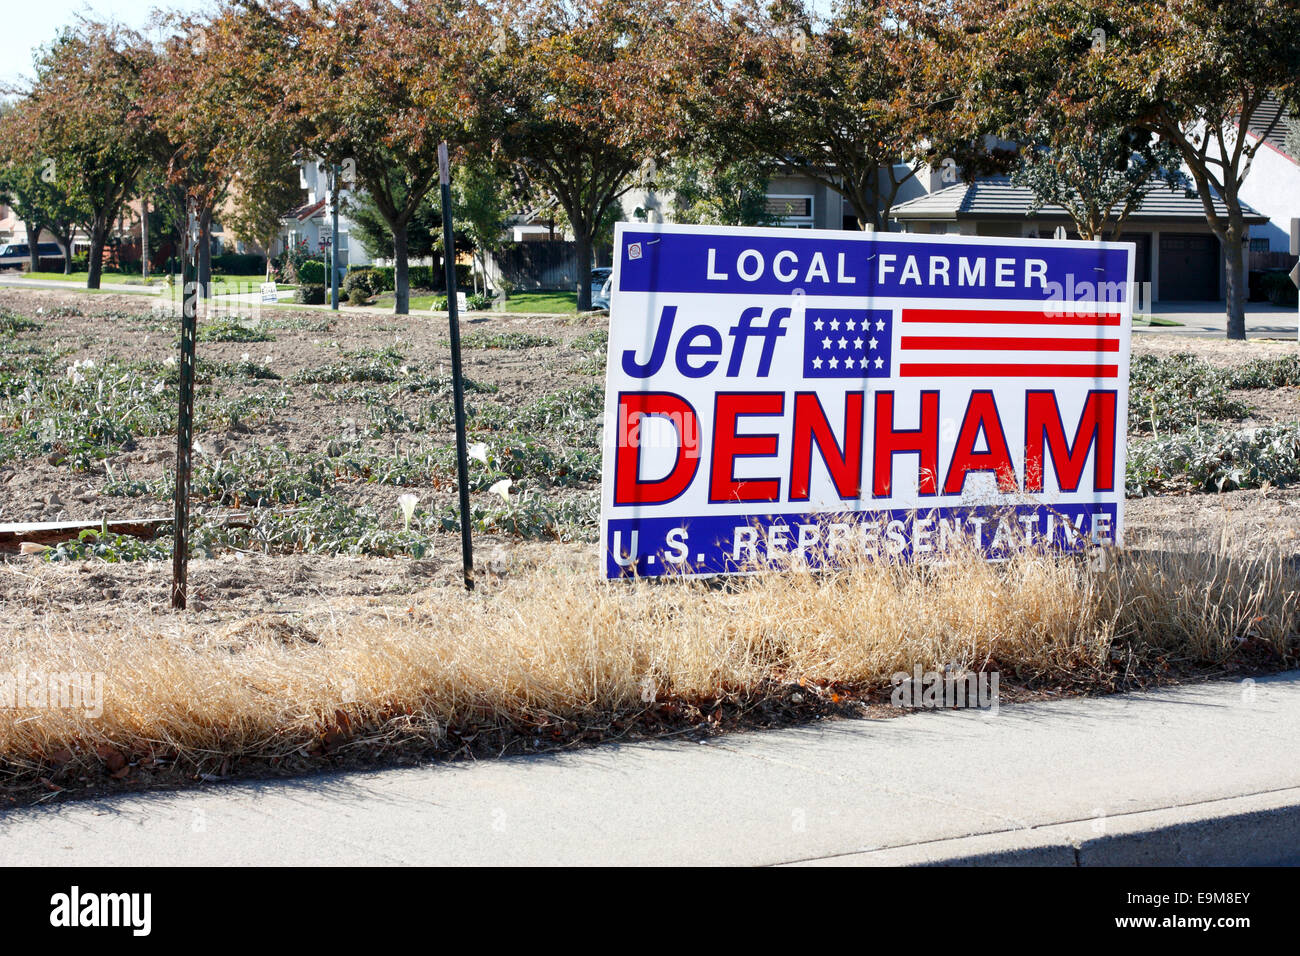 Modesto, Stanislaus county, California, USA. 29th October, 2014. Approximately a week after appearing, signs paid for by the Eggman for congress campaign accusing Congressman Jeff Denham of shutting down the federal government have been cut down. Representative Denham is running for re-election against Michael Eggman for California's 10th congressional district. The midterm elections are only six days away. Credit:  Don Bartell/Alamy Live News Stock Photo